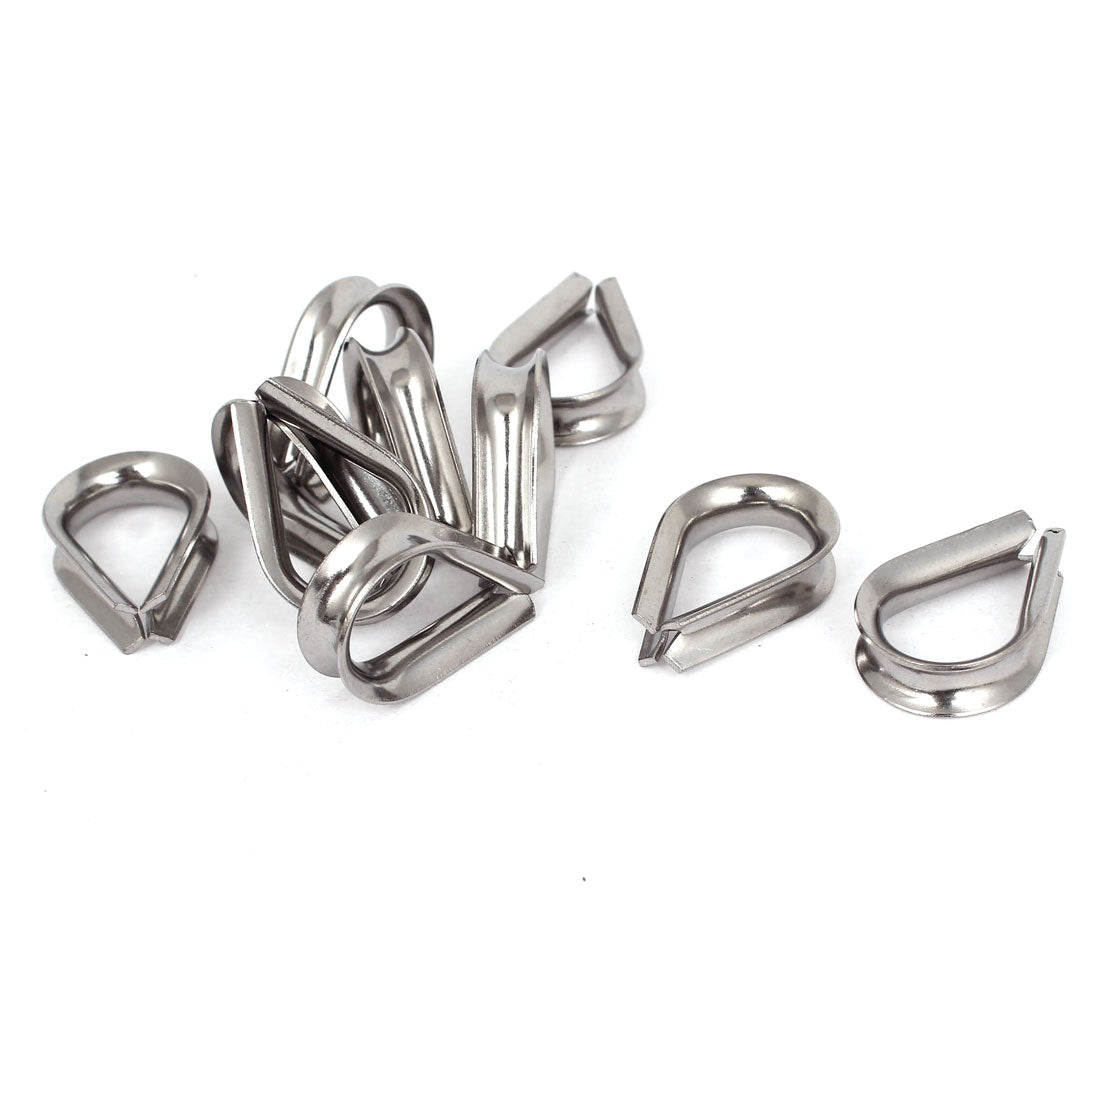 uxcell Uxcell Stainless Steel 6mm Standard Wire Rope Cable Thimbles Rigging Tool 10pcs